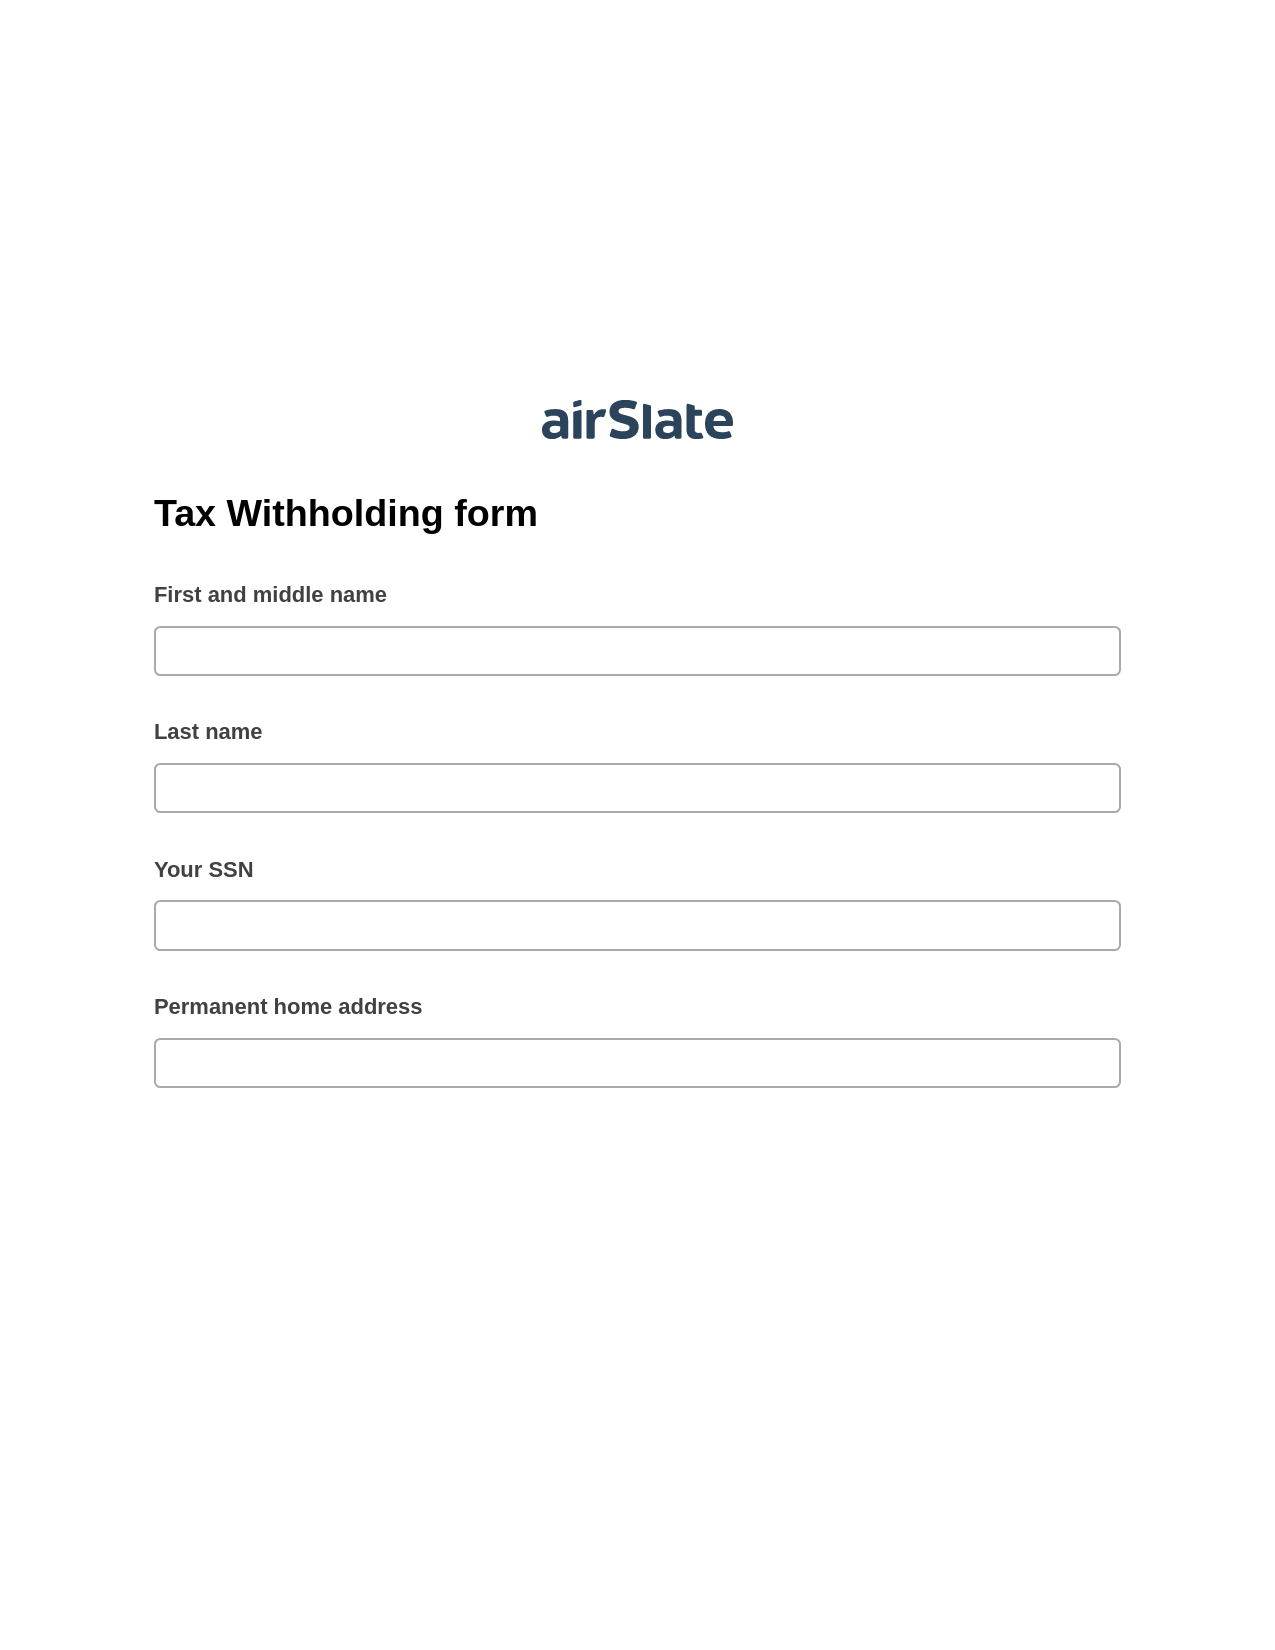 Multirole Tax Withholding form Pre-fill from CSV File Bot, Pre-fill with Custom Data Bot, Export to NetSuite Bot